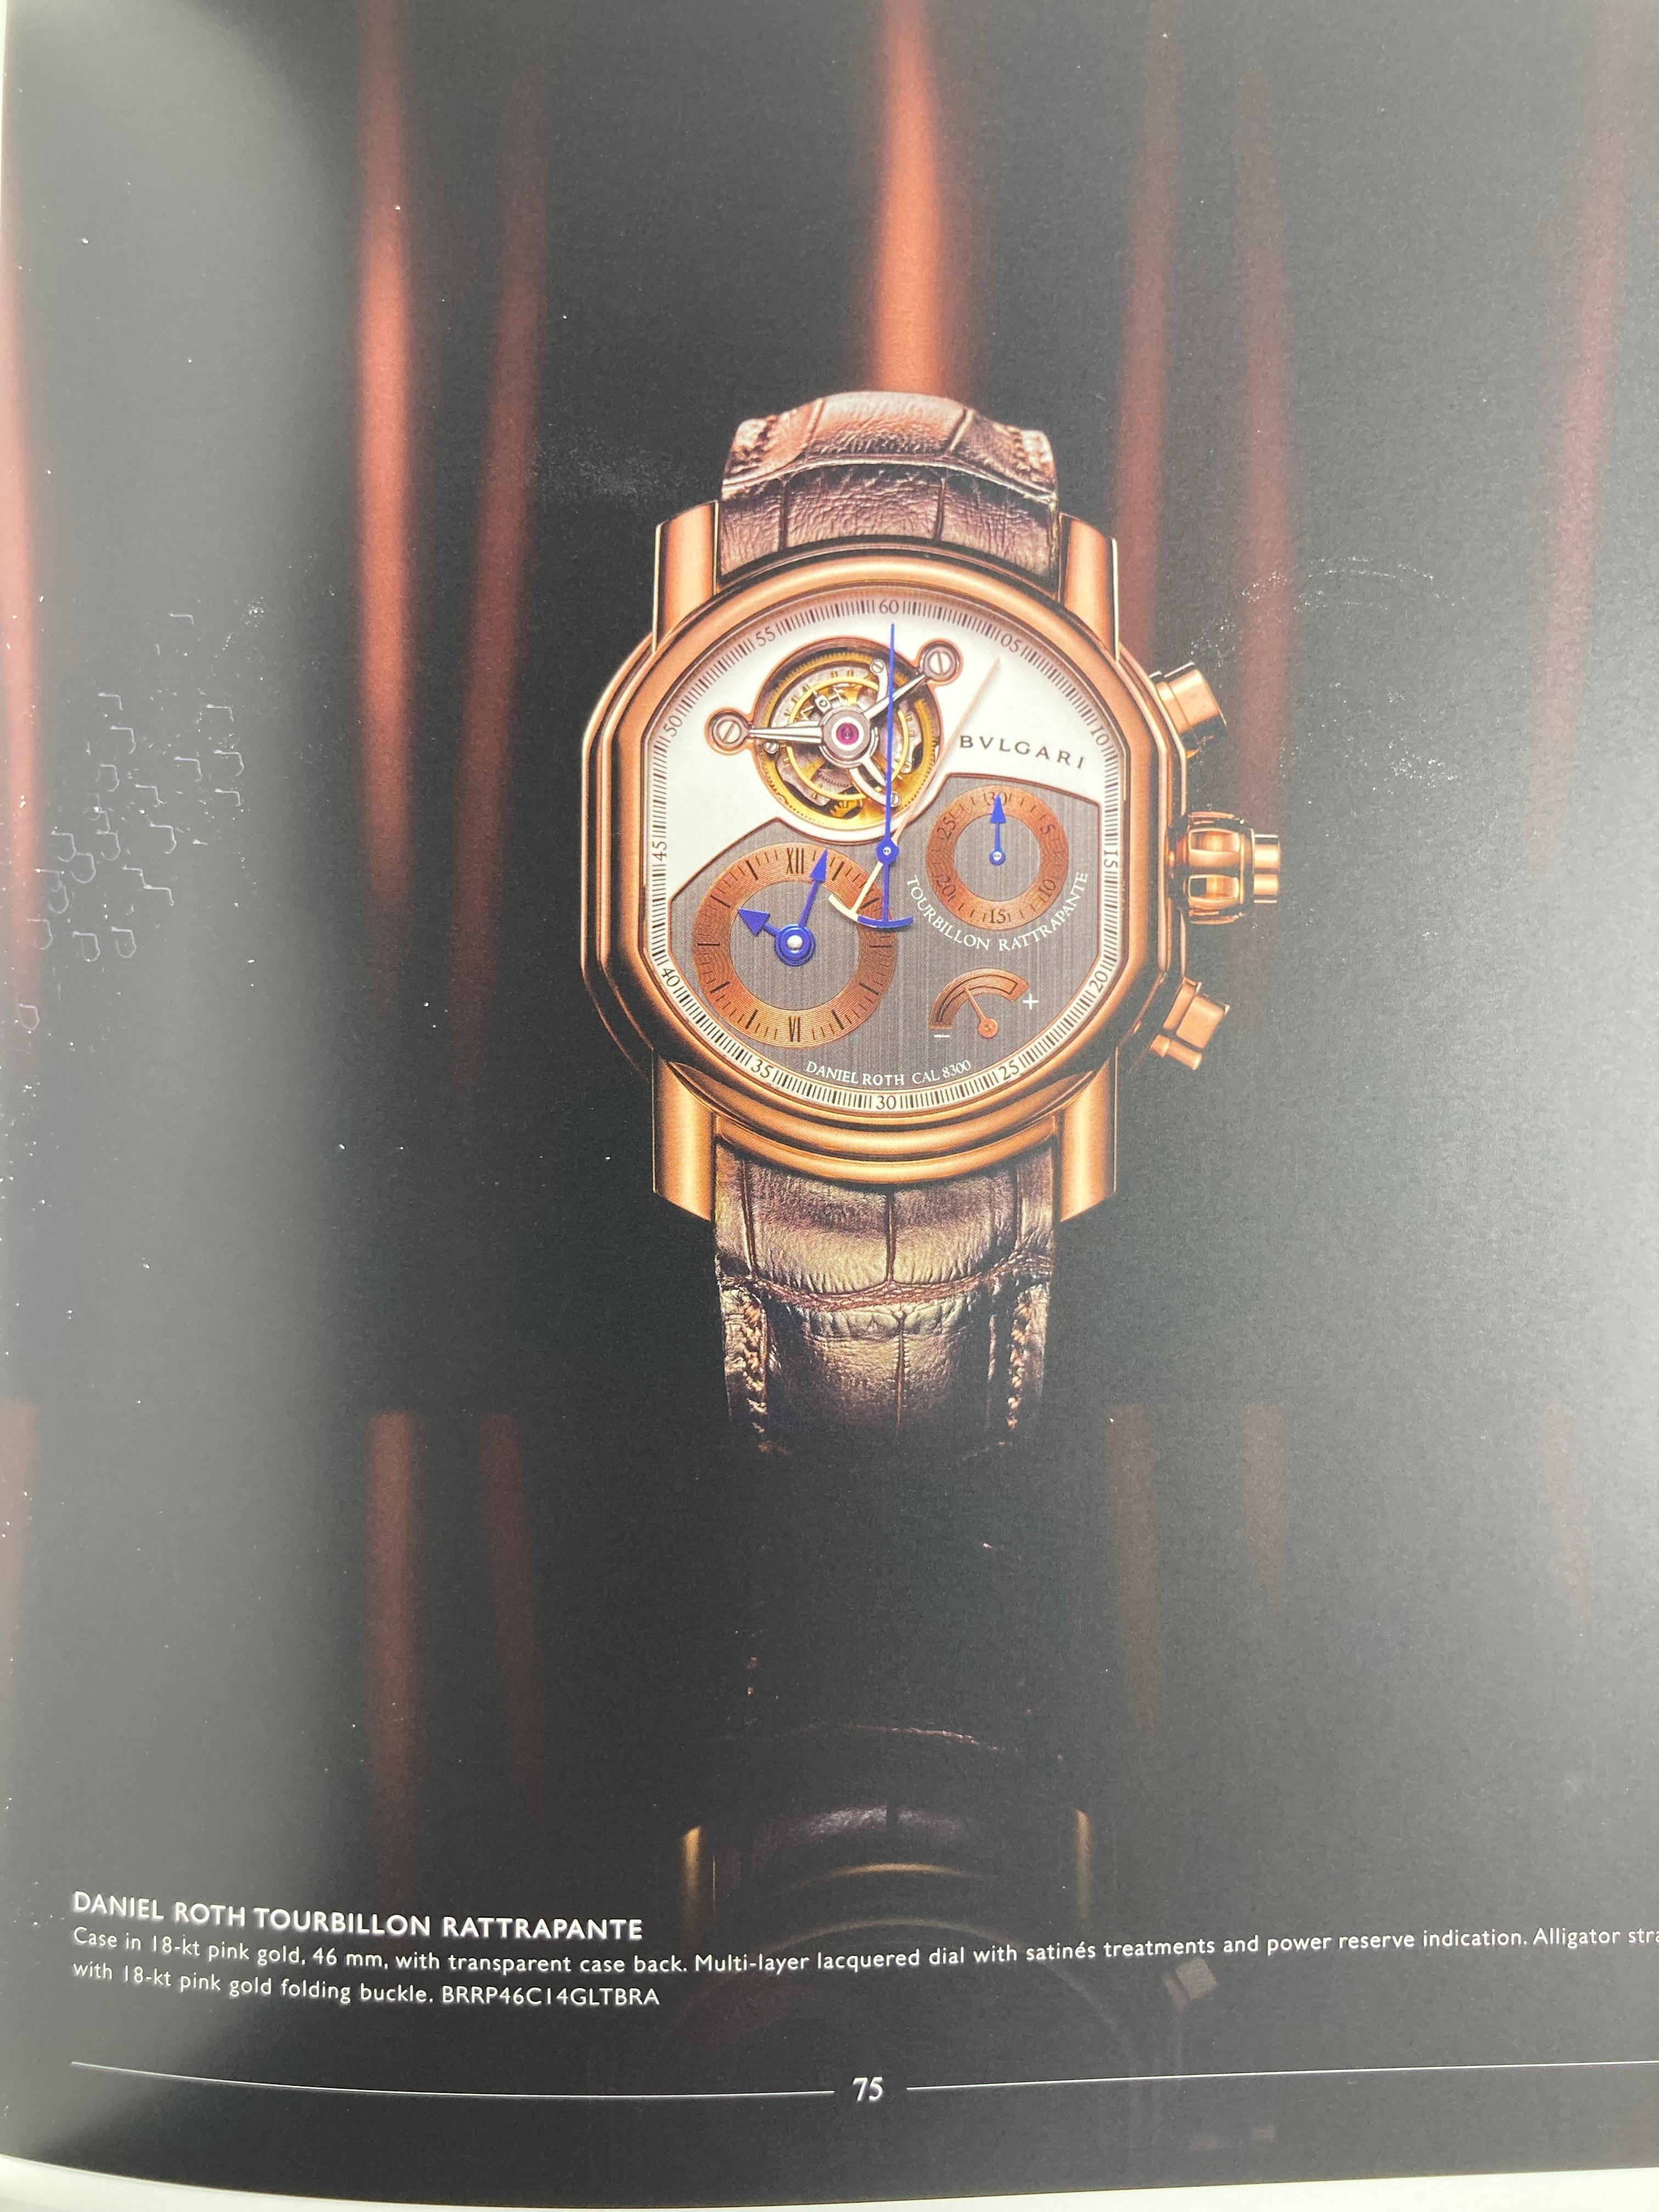 Set of Two Bulgari Brand Book Catalogue Jewelry and Watches 2013 For Sale 5